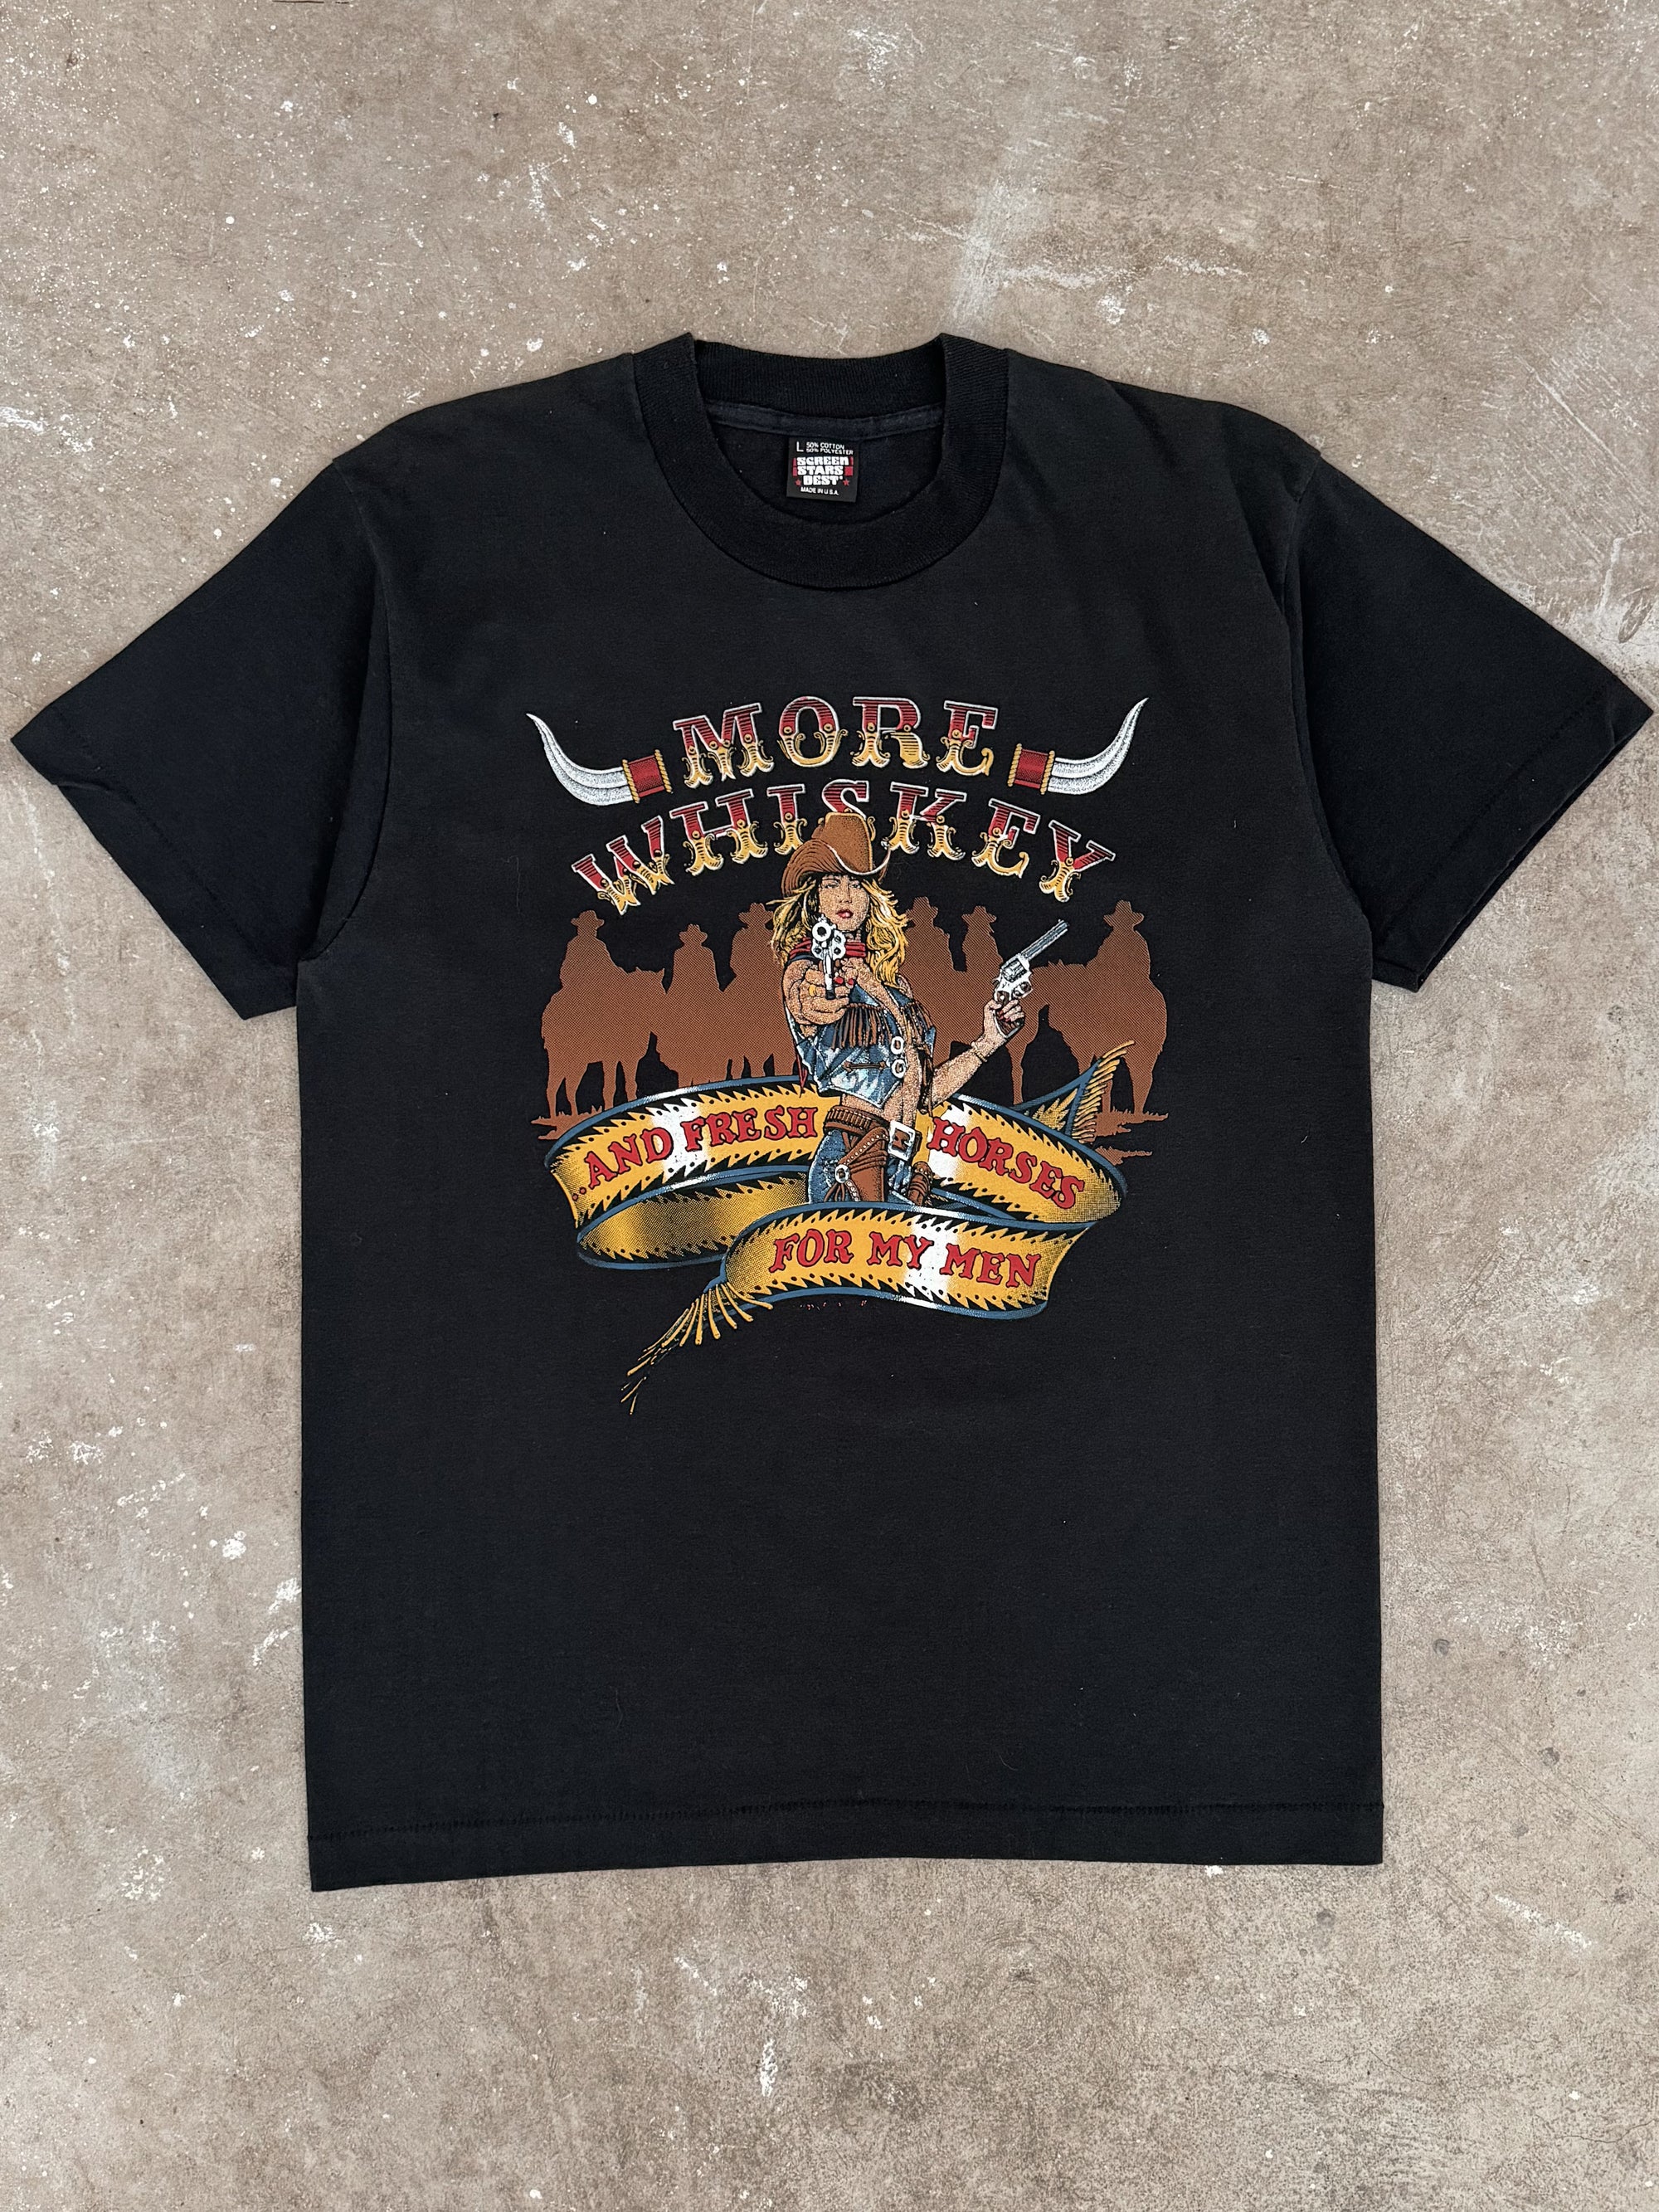 1980s/90s "More Whiskey" Tee (M)